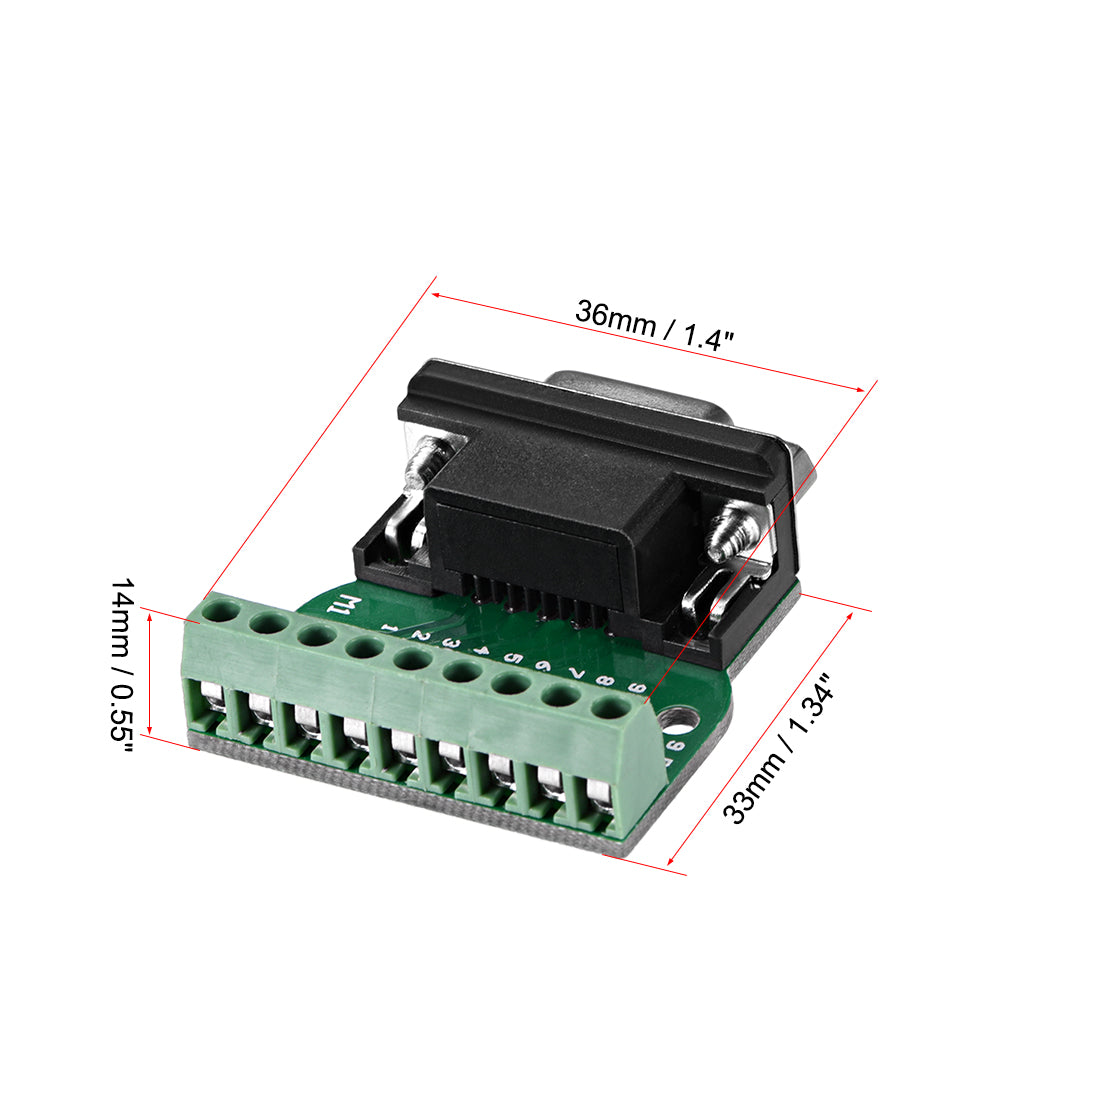 uxcell Uxcell D-sub DB9 Breakout Board Connector 9 Pin 2 Row Female RS232 Serial Port Solderless Terminal Block Adapter with Positioning Nuts